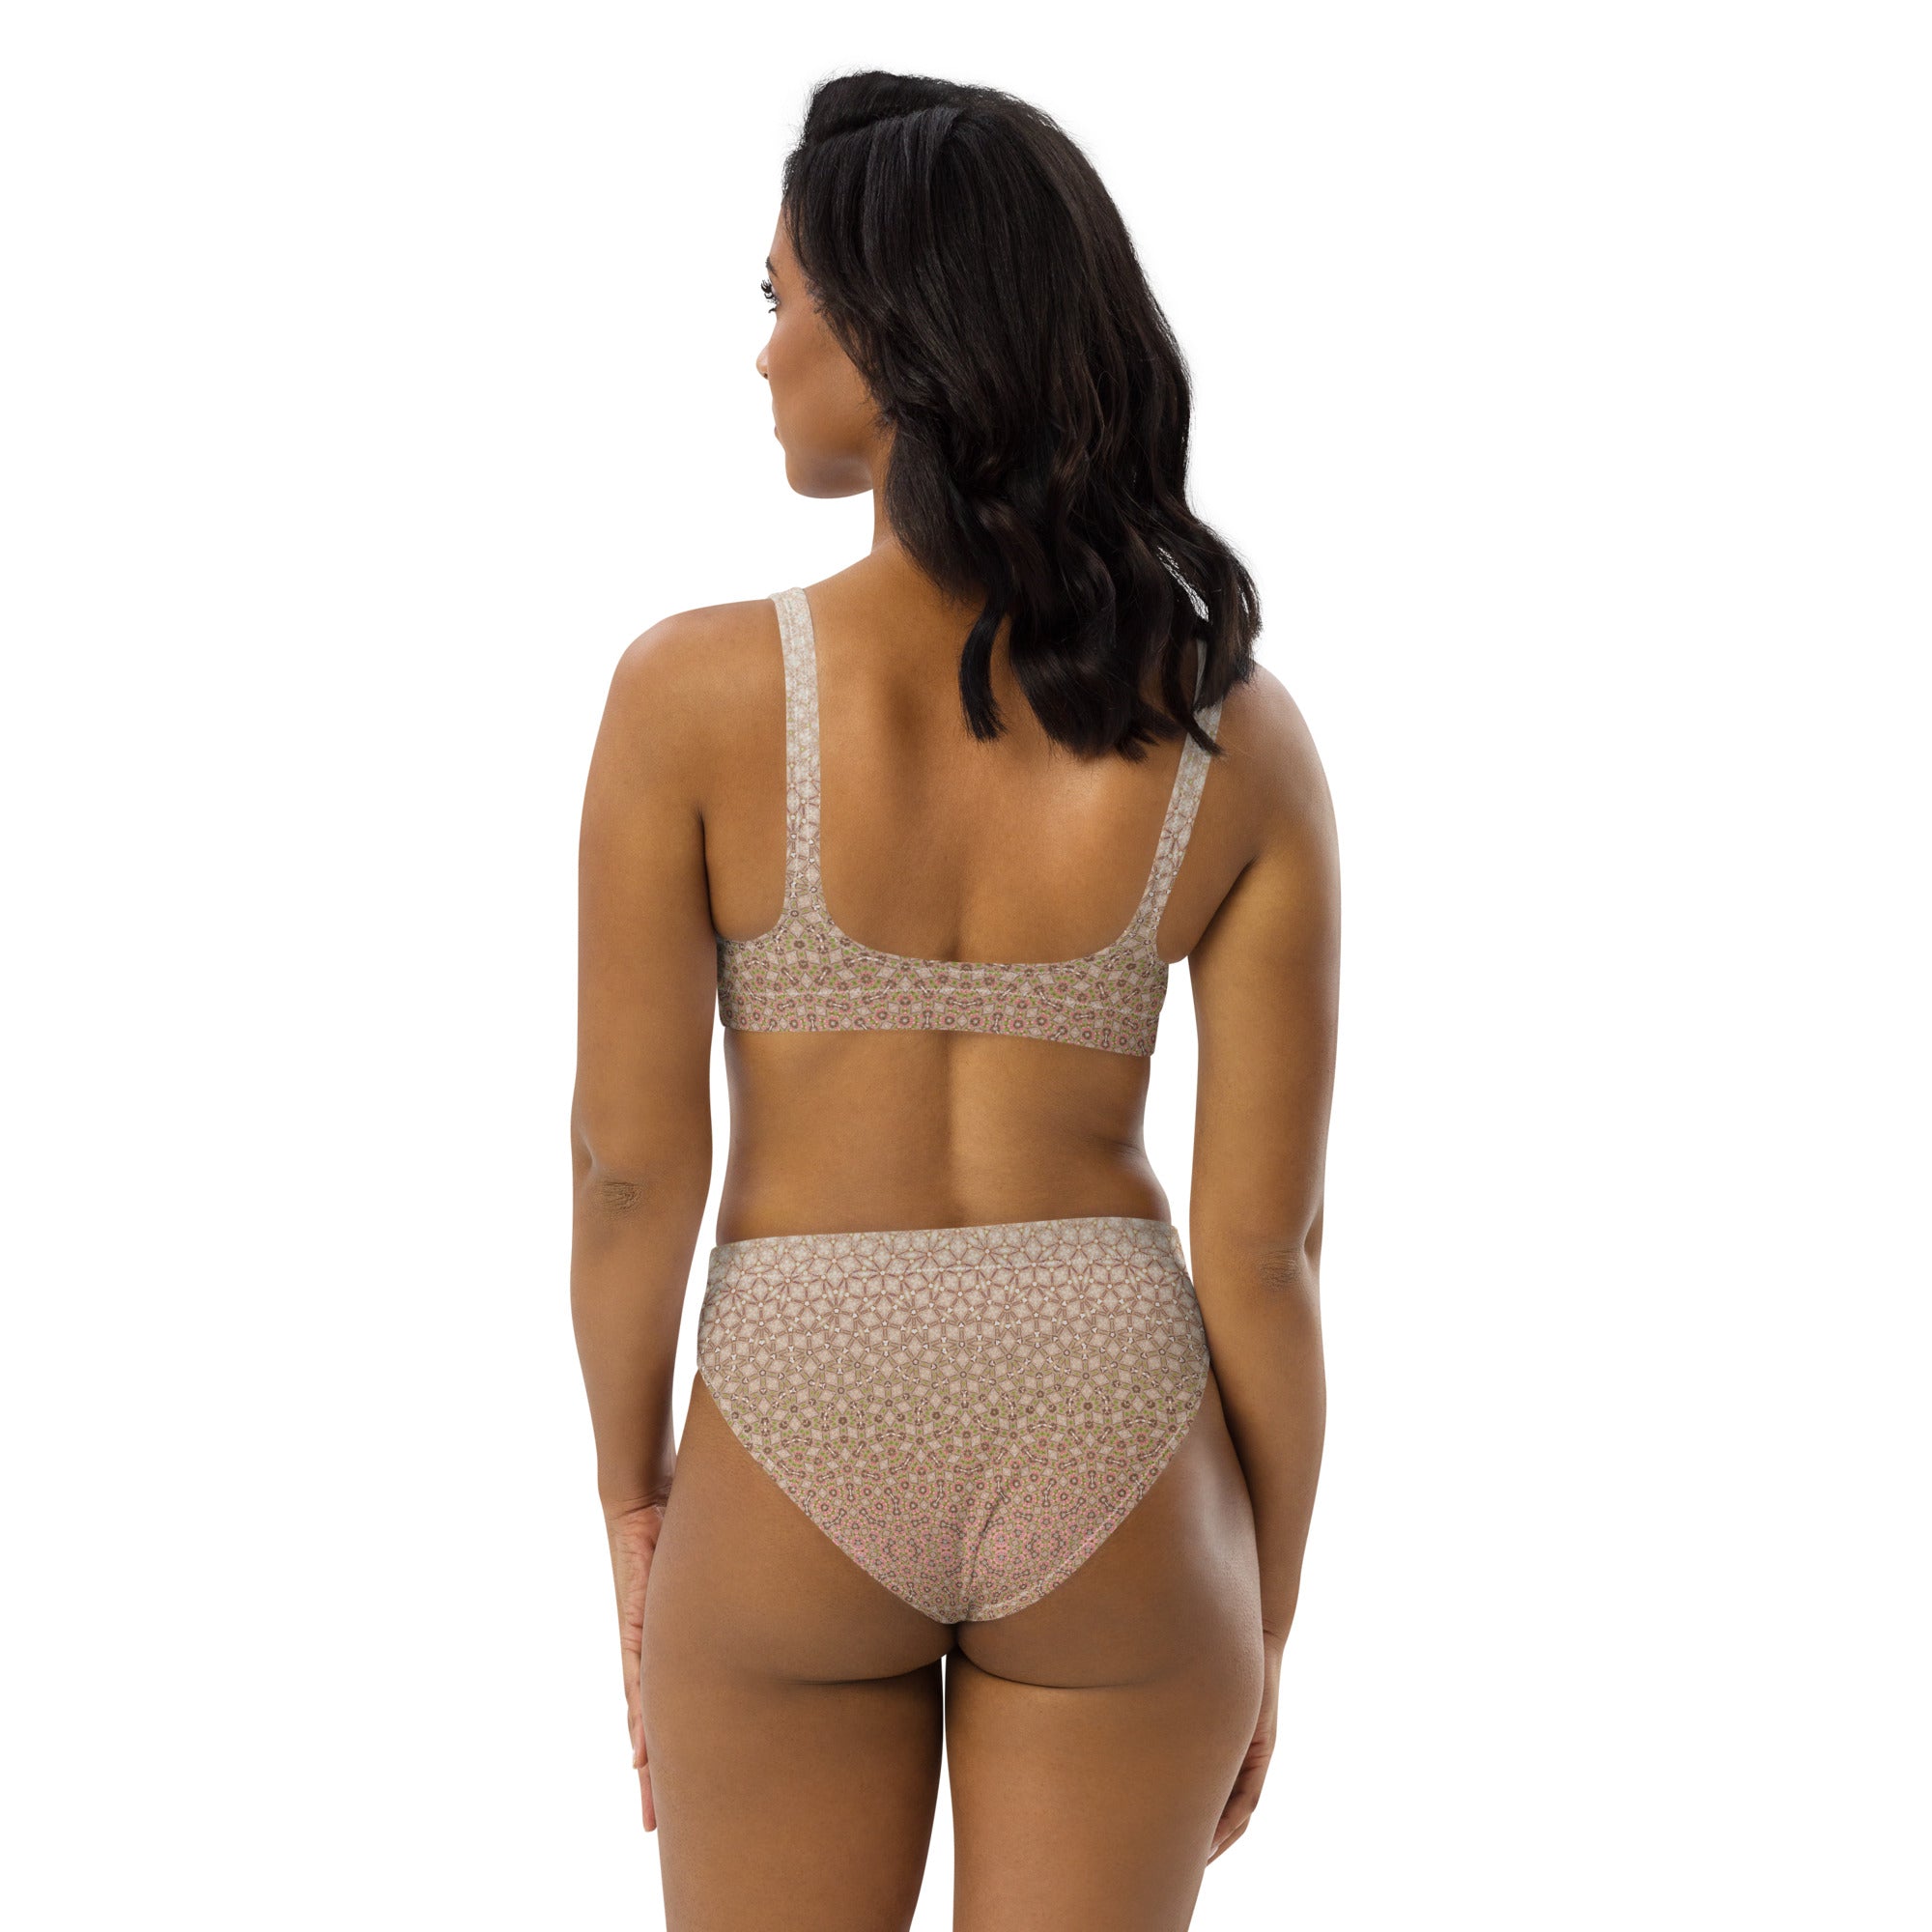 Delicate Pale Pink & Beige Rosy patterned Recycled high-waisted bikini, by Sensus Studio Design